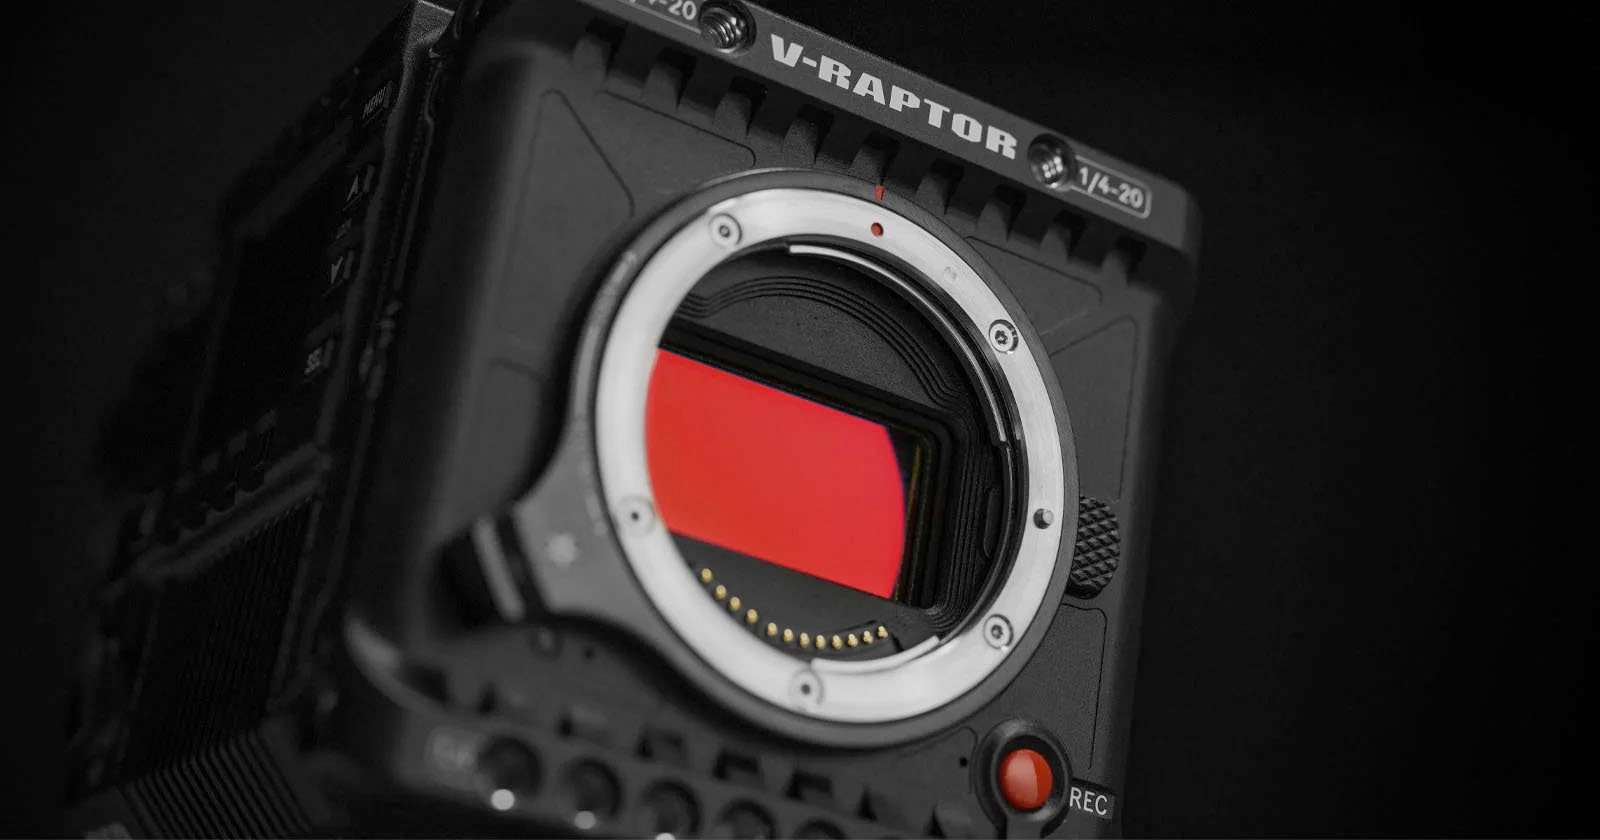  red will continue support canon but nikon considering 